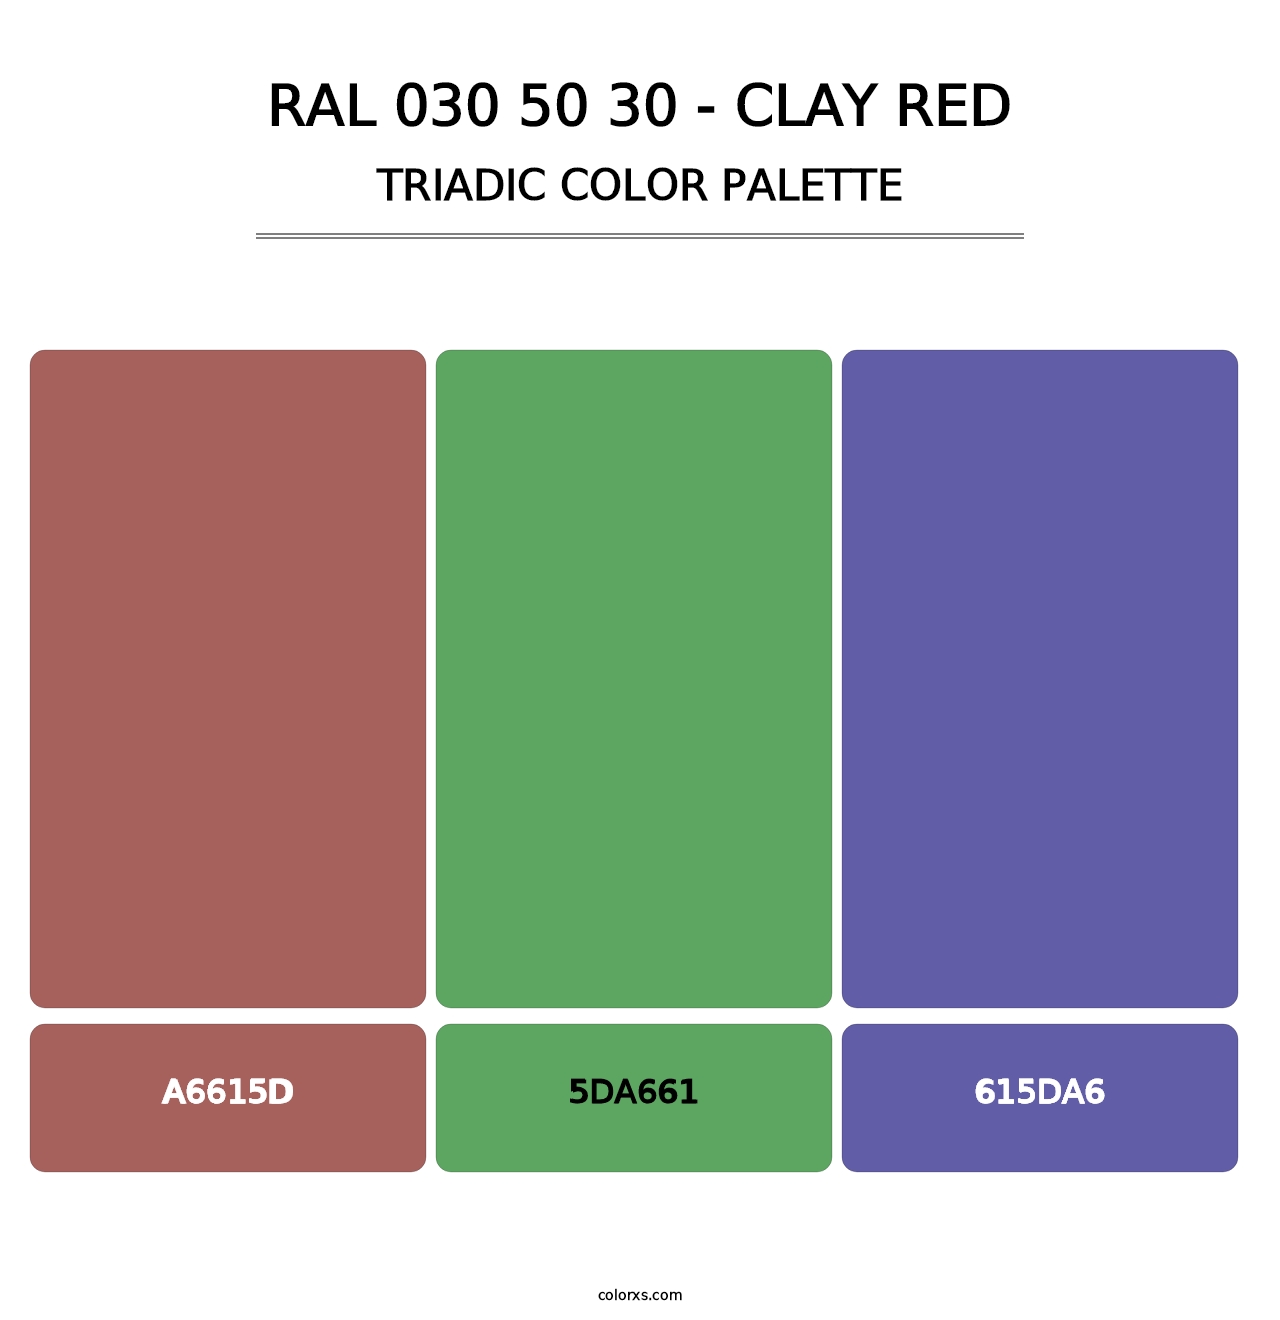 RAL 030 50 30 - Clay Red - Triadic Color Palette